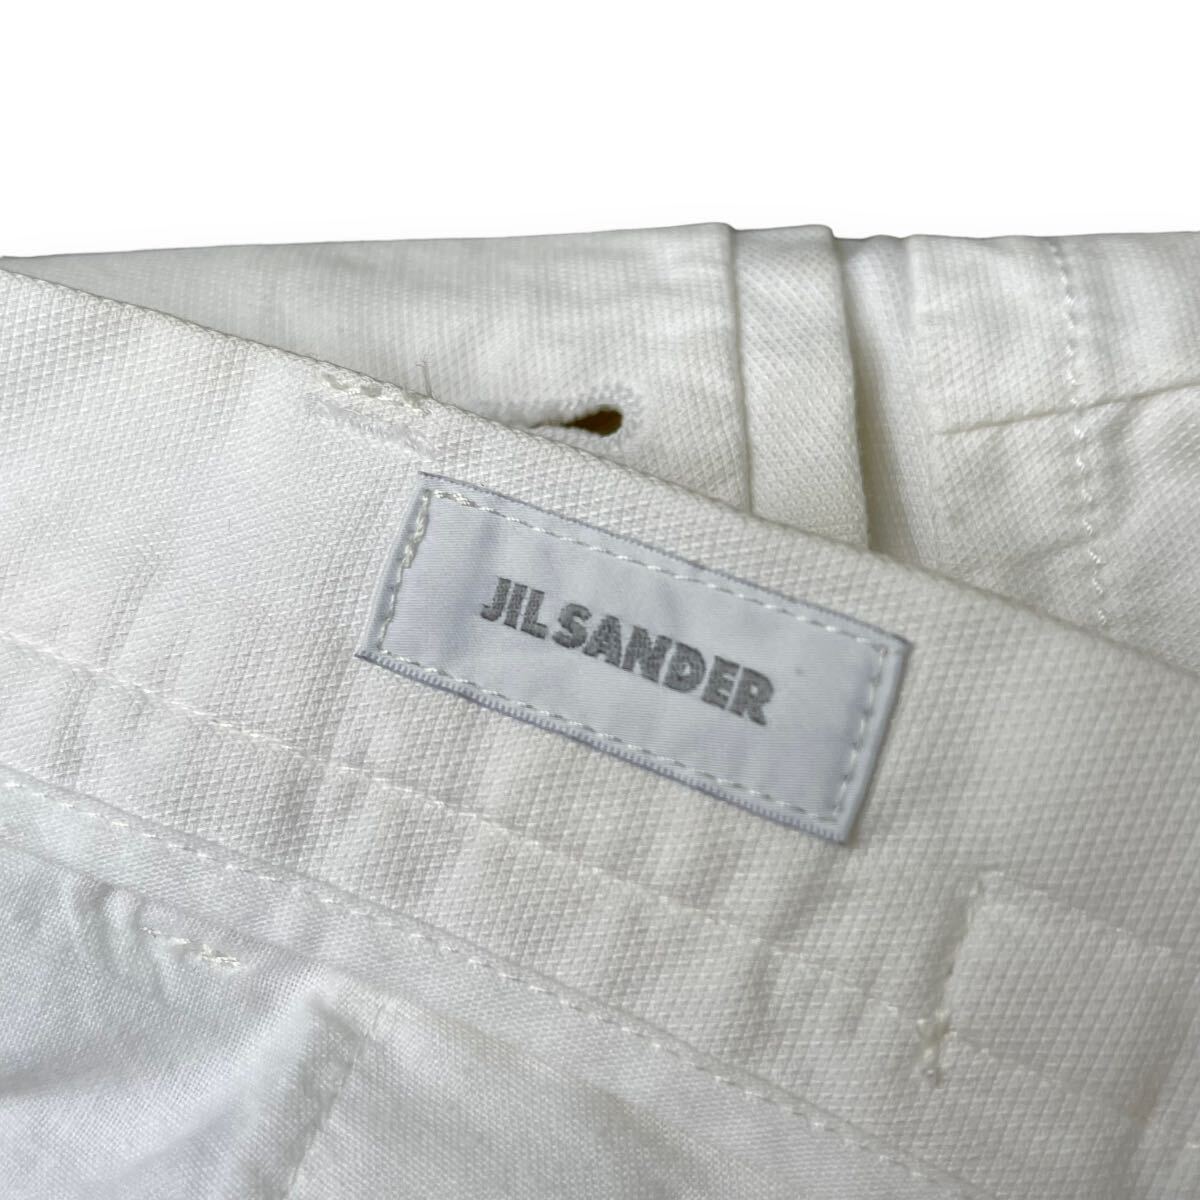 2010ss jil sander by Raf simons white slacks pants collection rare archive Italy の画像7